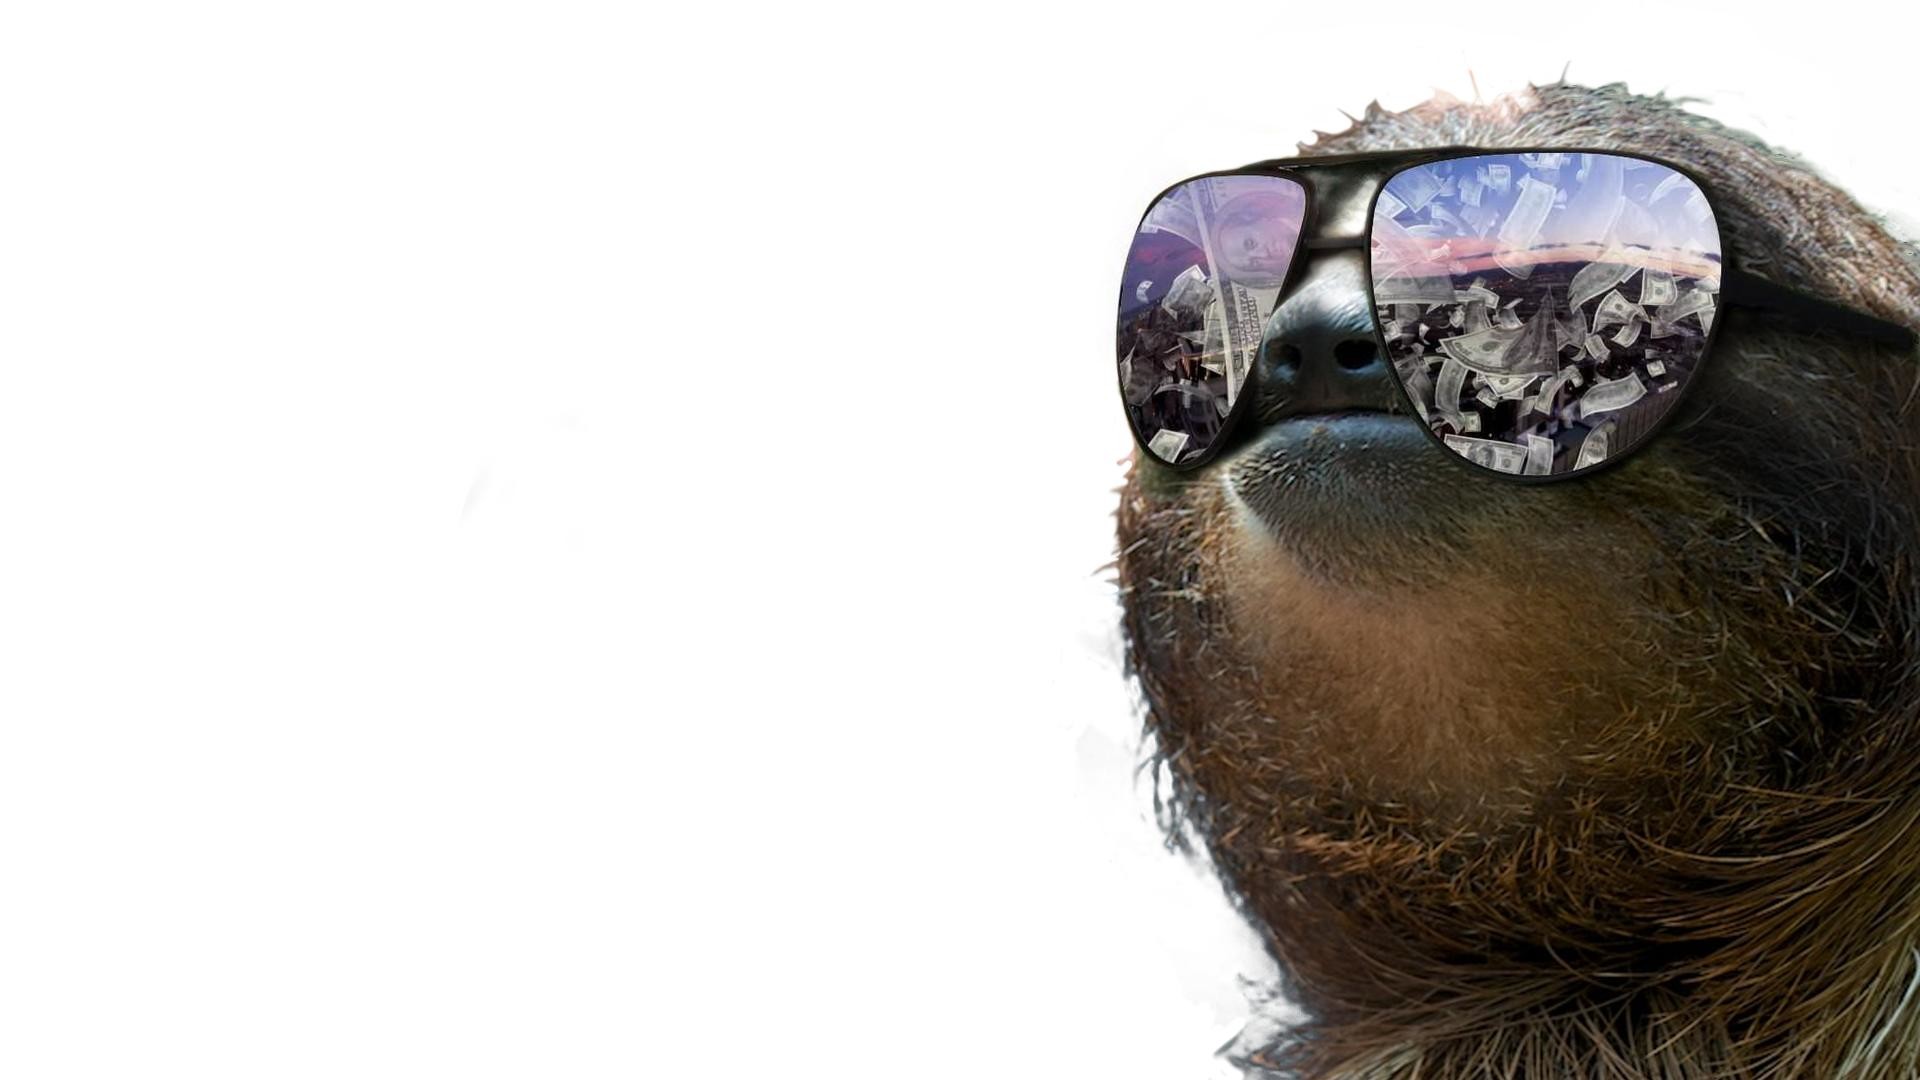 1920x1080 Sloth Wallpaper Design Ideas ~ A Very Slothy Wallpaper Xpost From .